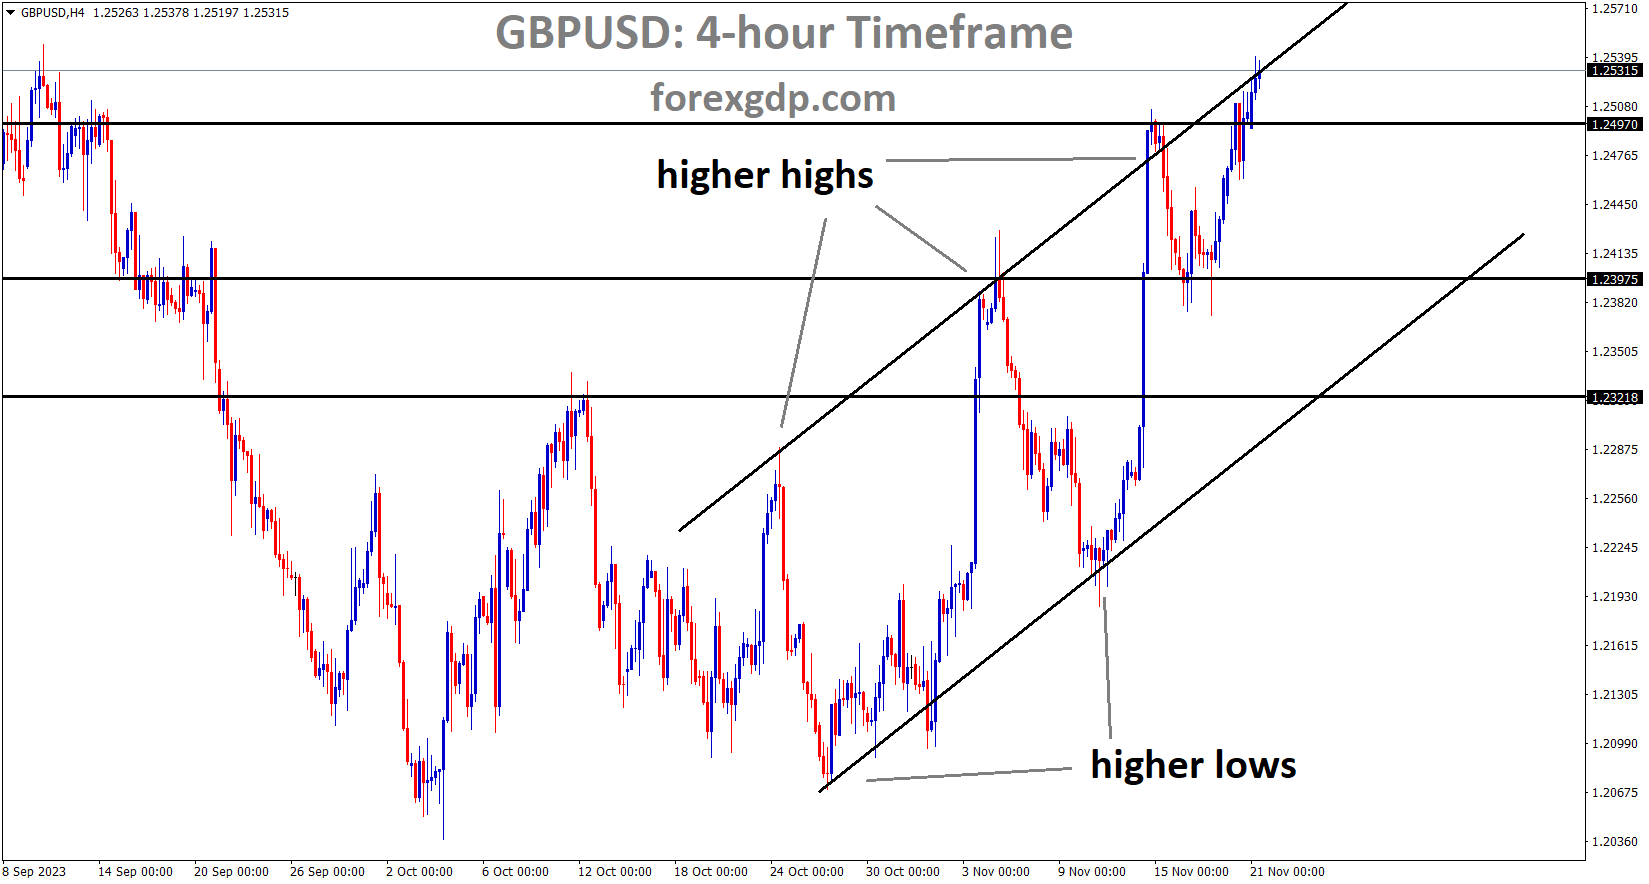 GBPUSD is moving in an Ascending channel and the market has reached the higher high area of the channel